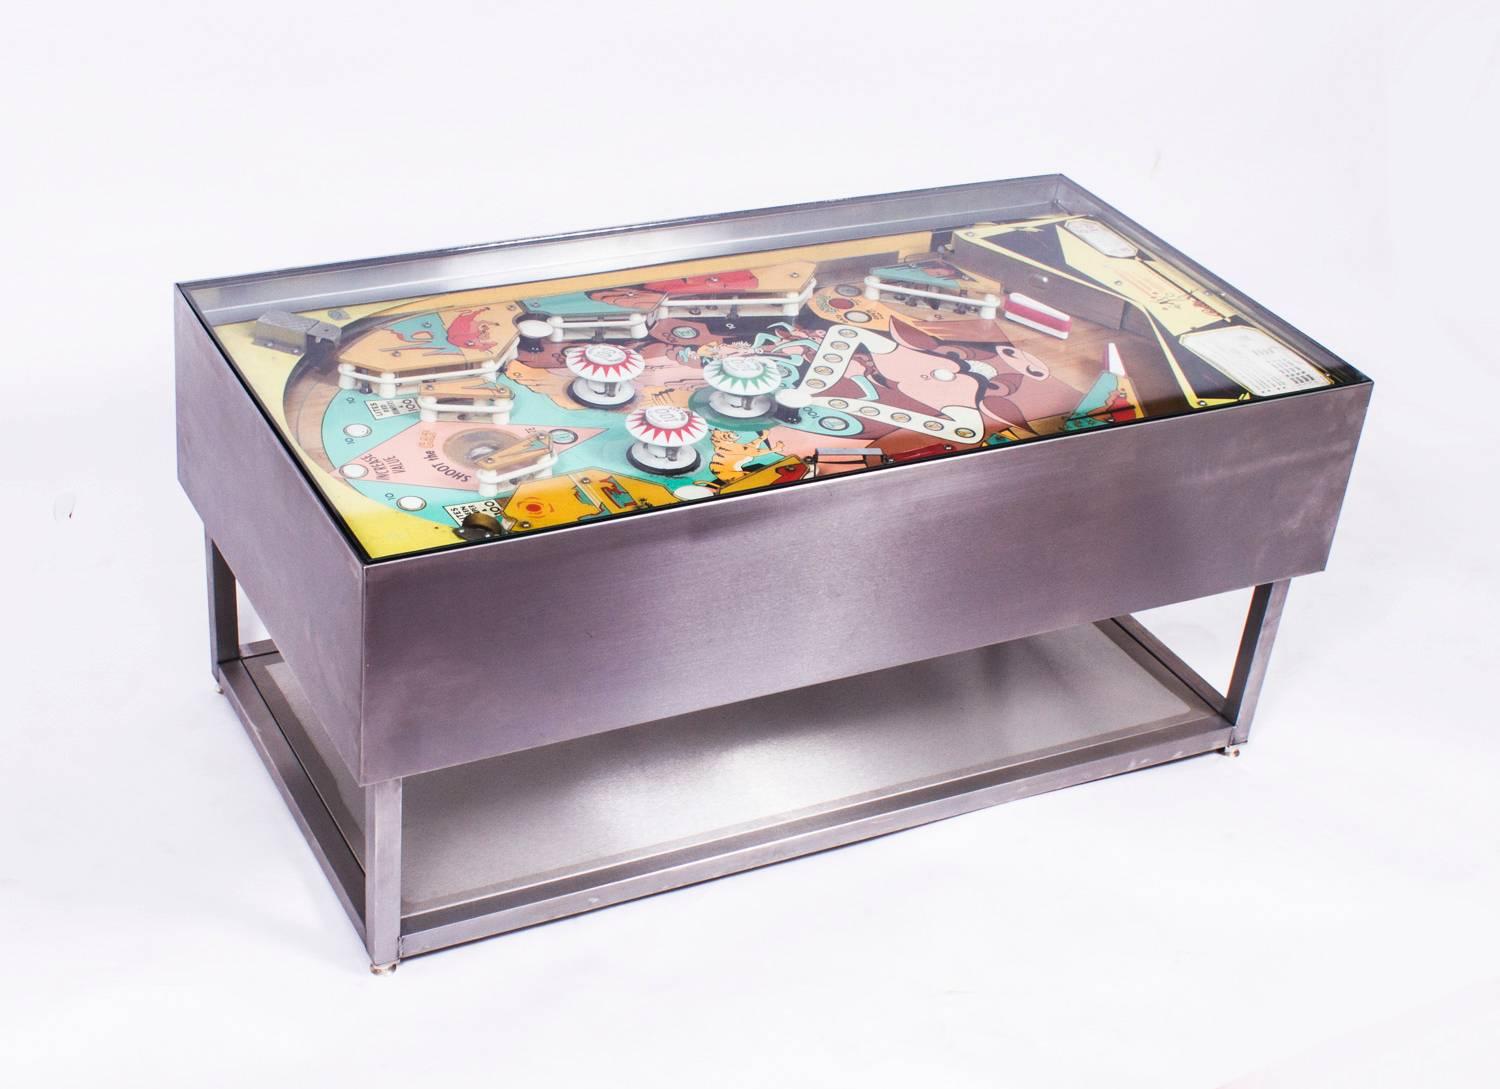 This is an original Trail Drive pinball machine that was cleverly converted into a coffee table, the pinball components are circa 1970 in age.

The colorful coffee table is made of brushed steel with a glass top. The internal components light up